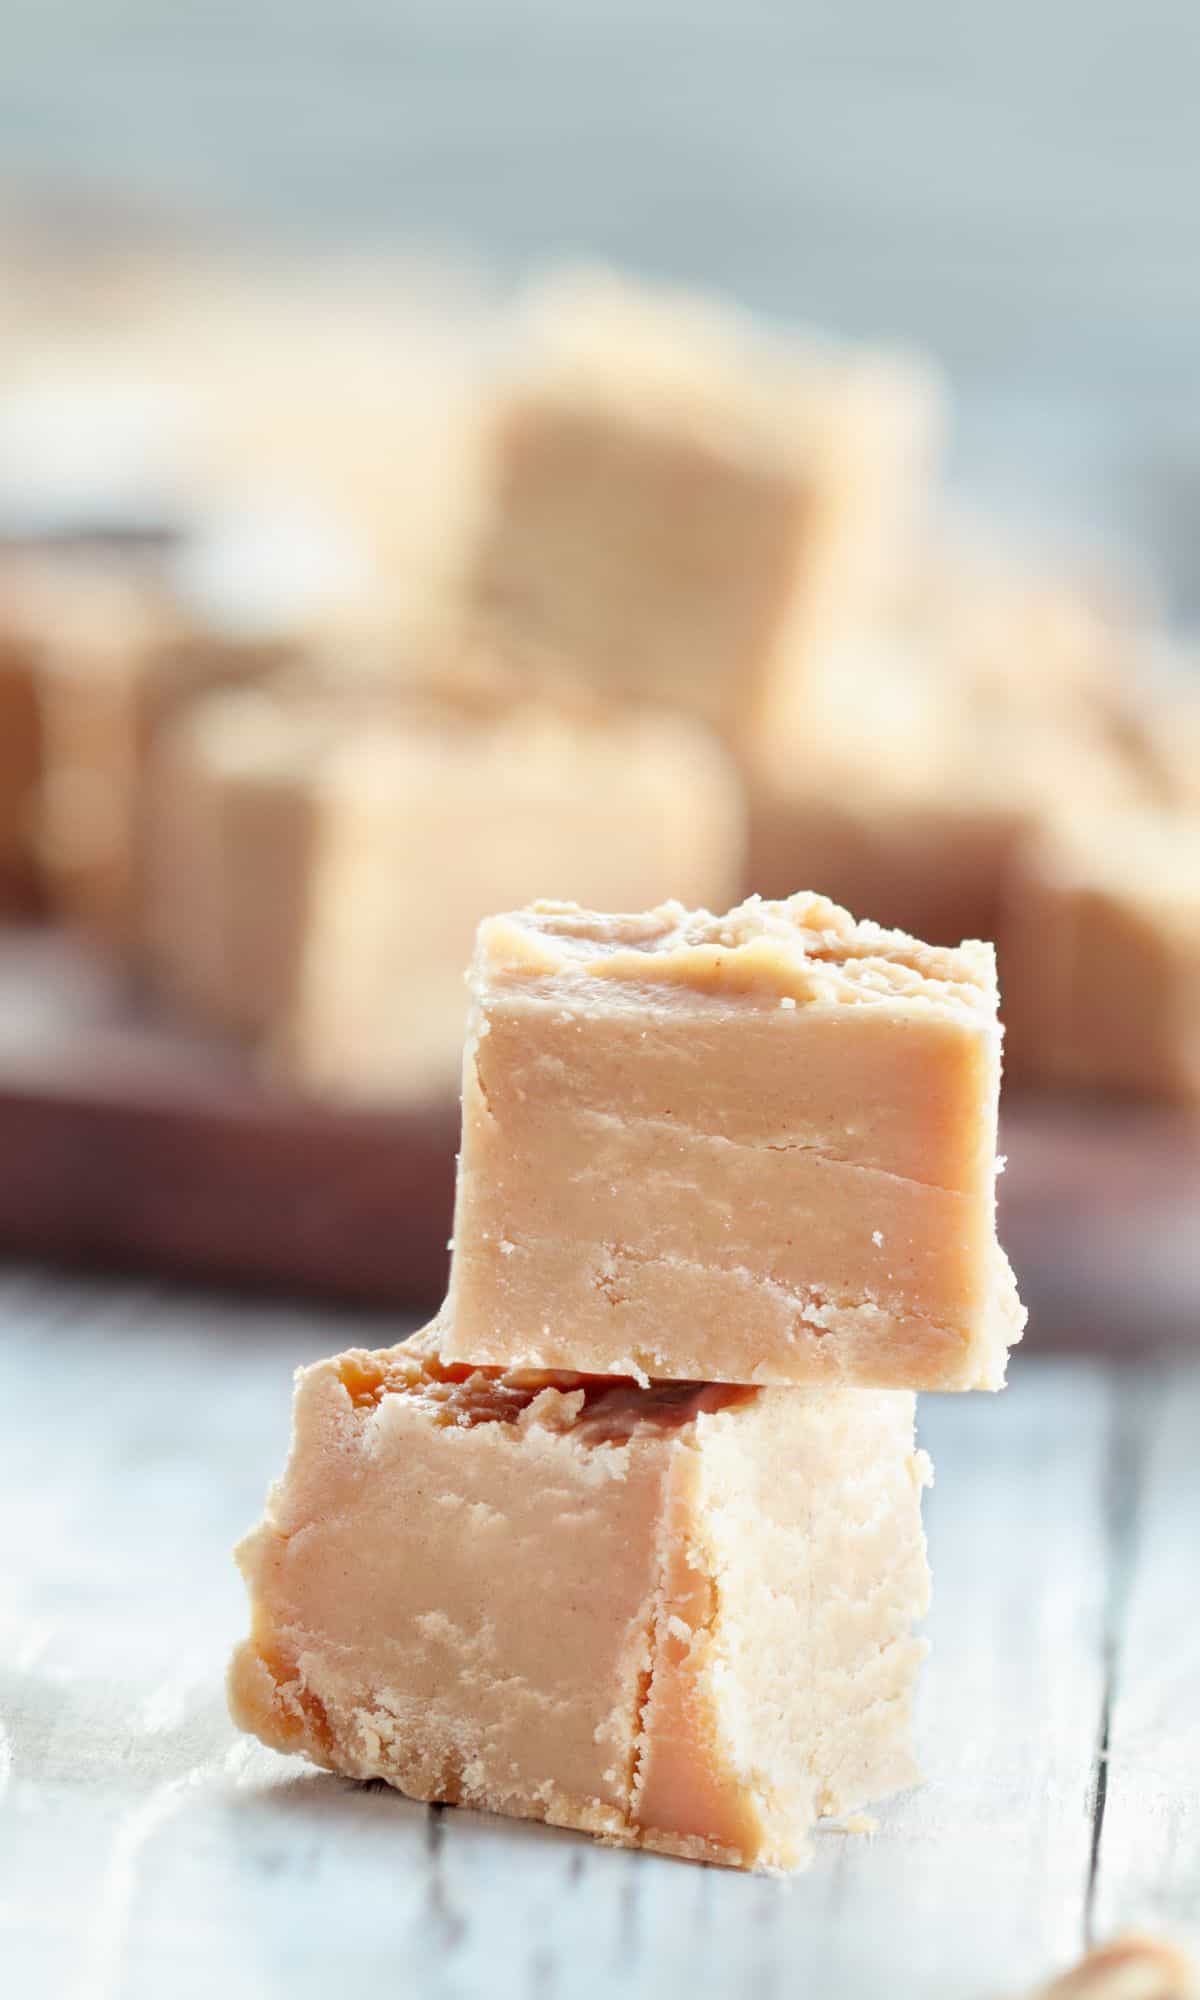 Stacks of cubed homemade peanut butter fudge with chocolate fudge in the background